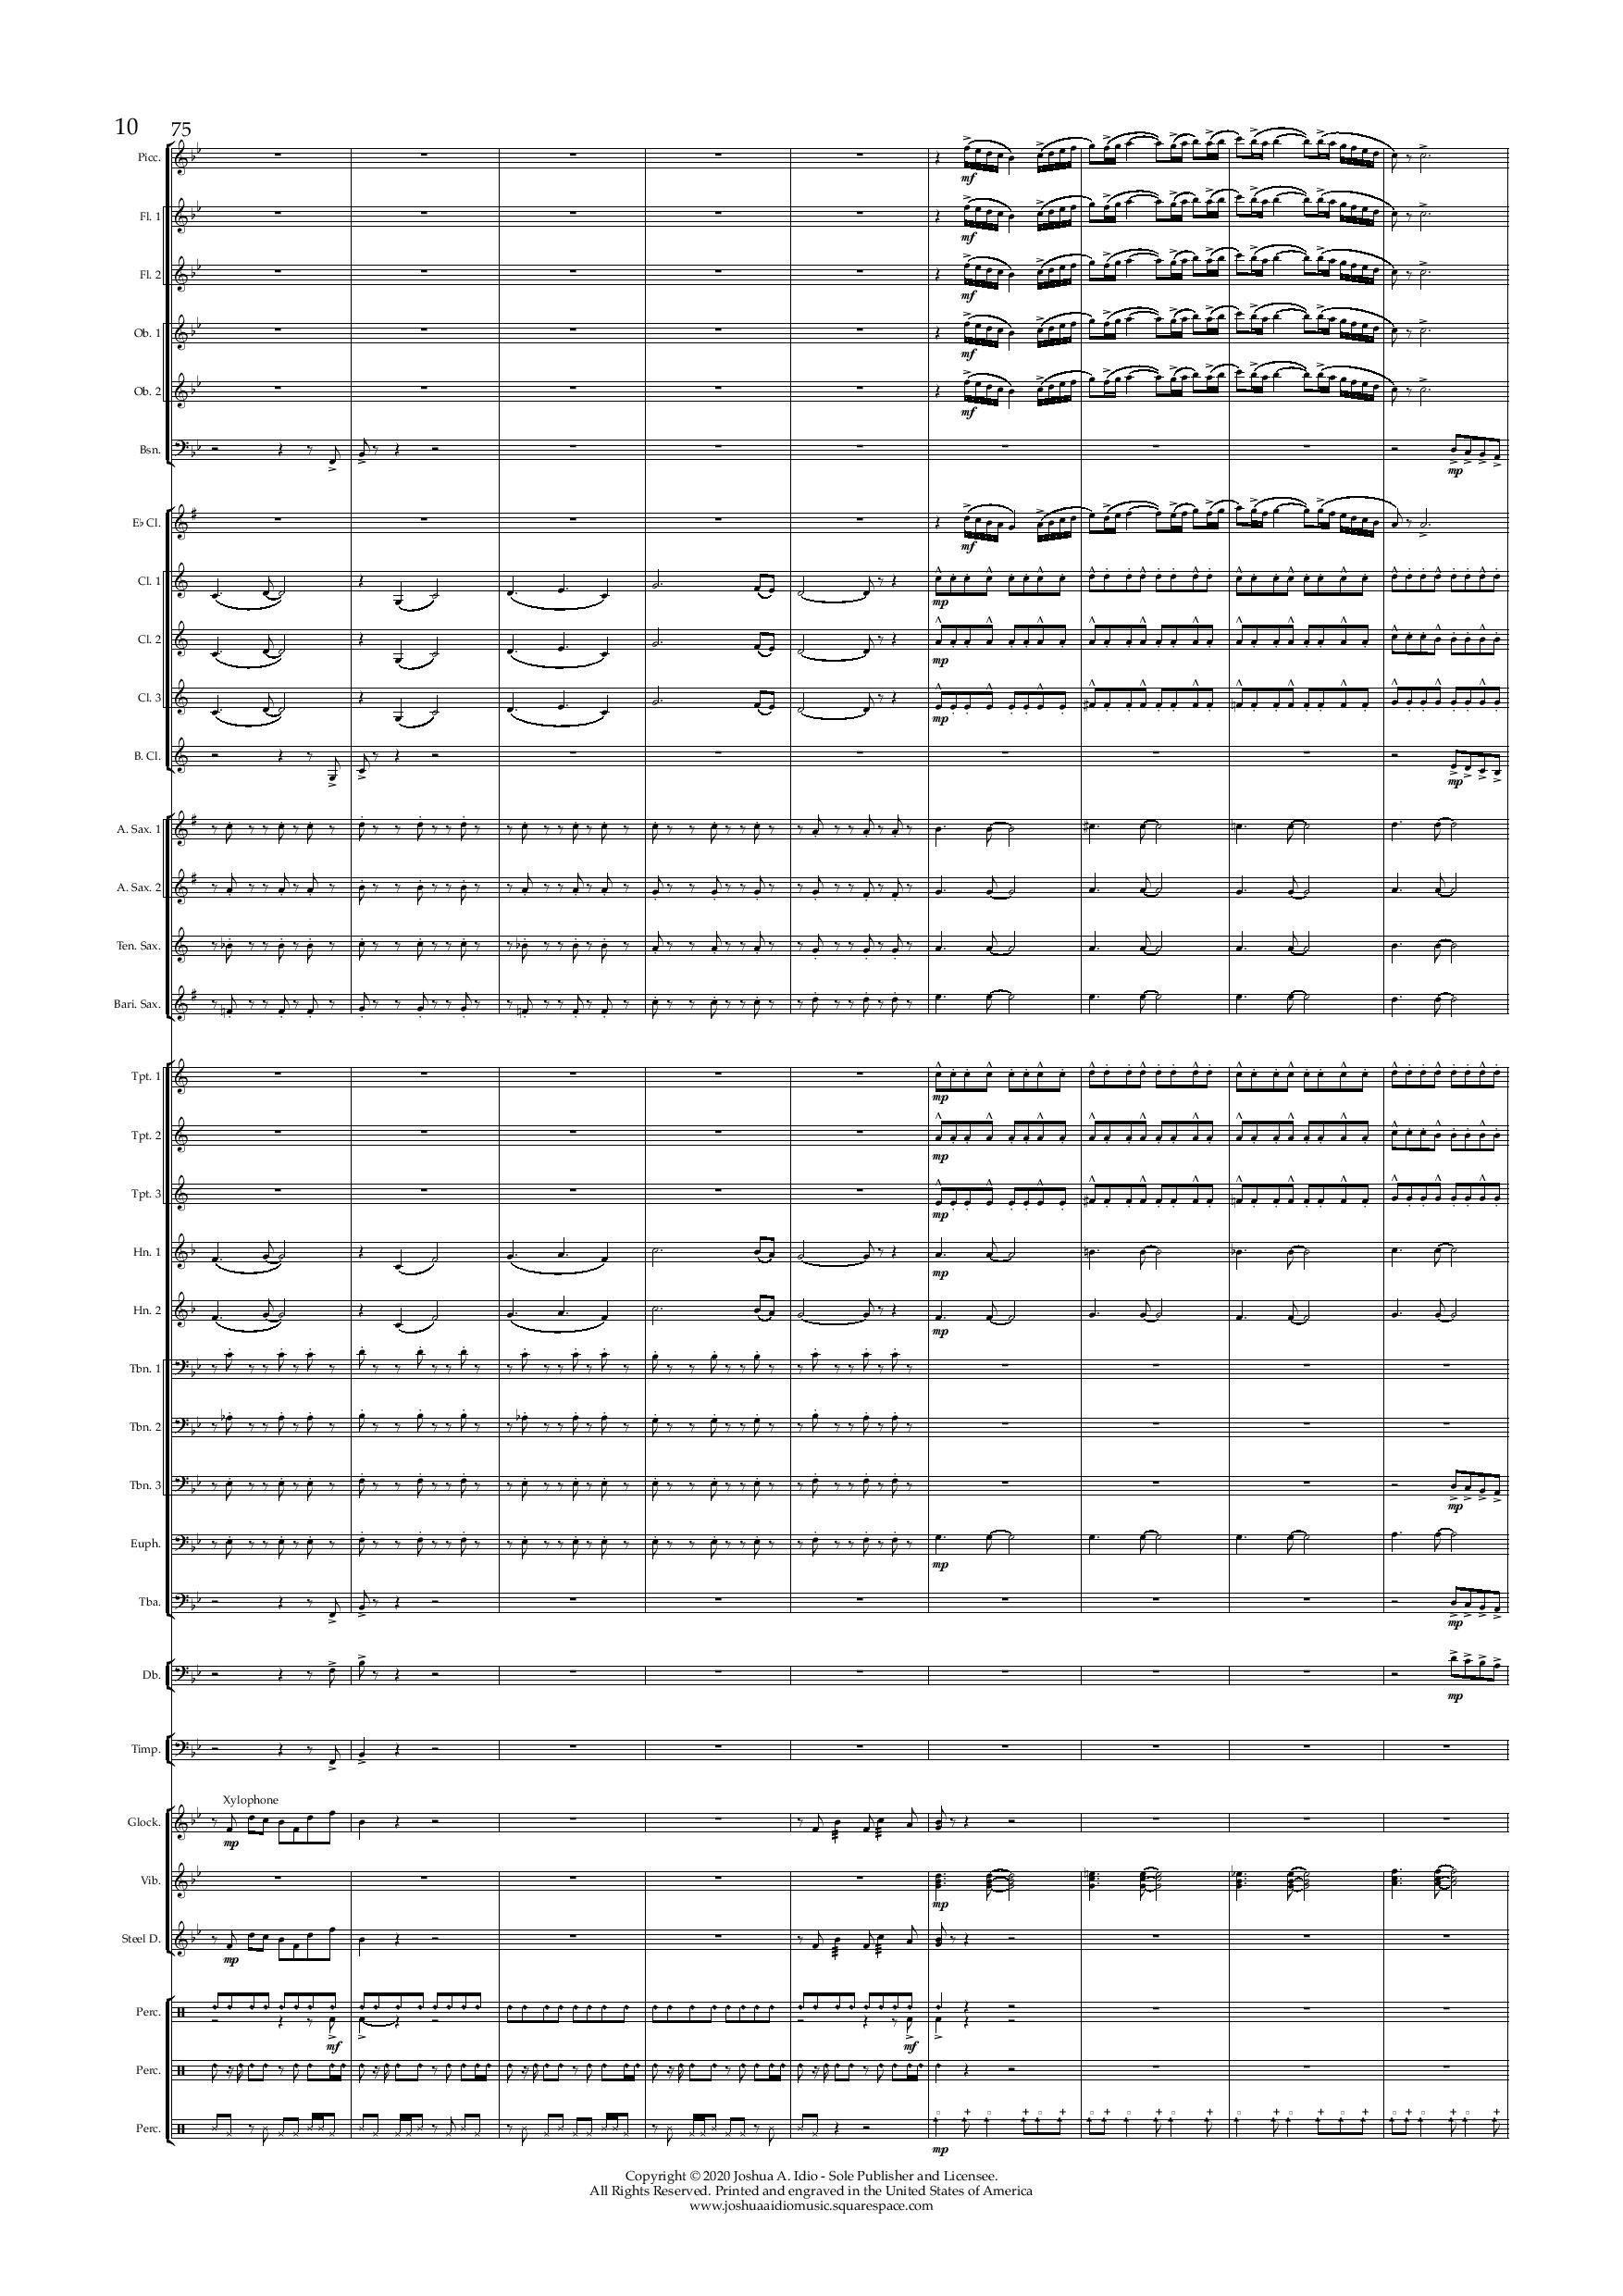 The Cruise Line Dream - Conductor s Score-page-010.jpg